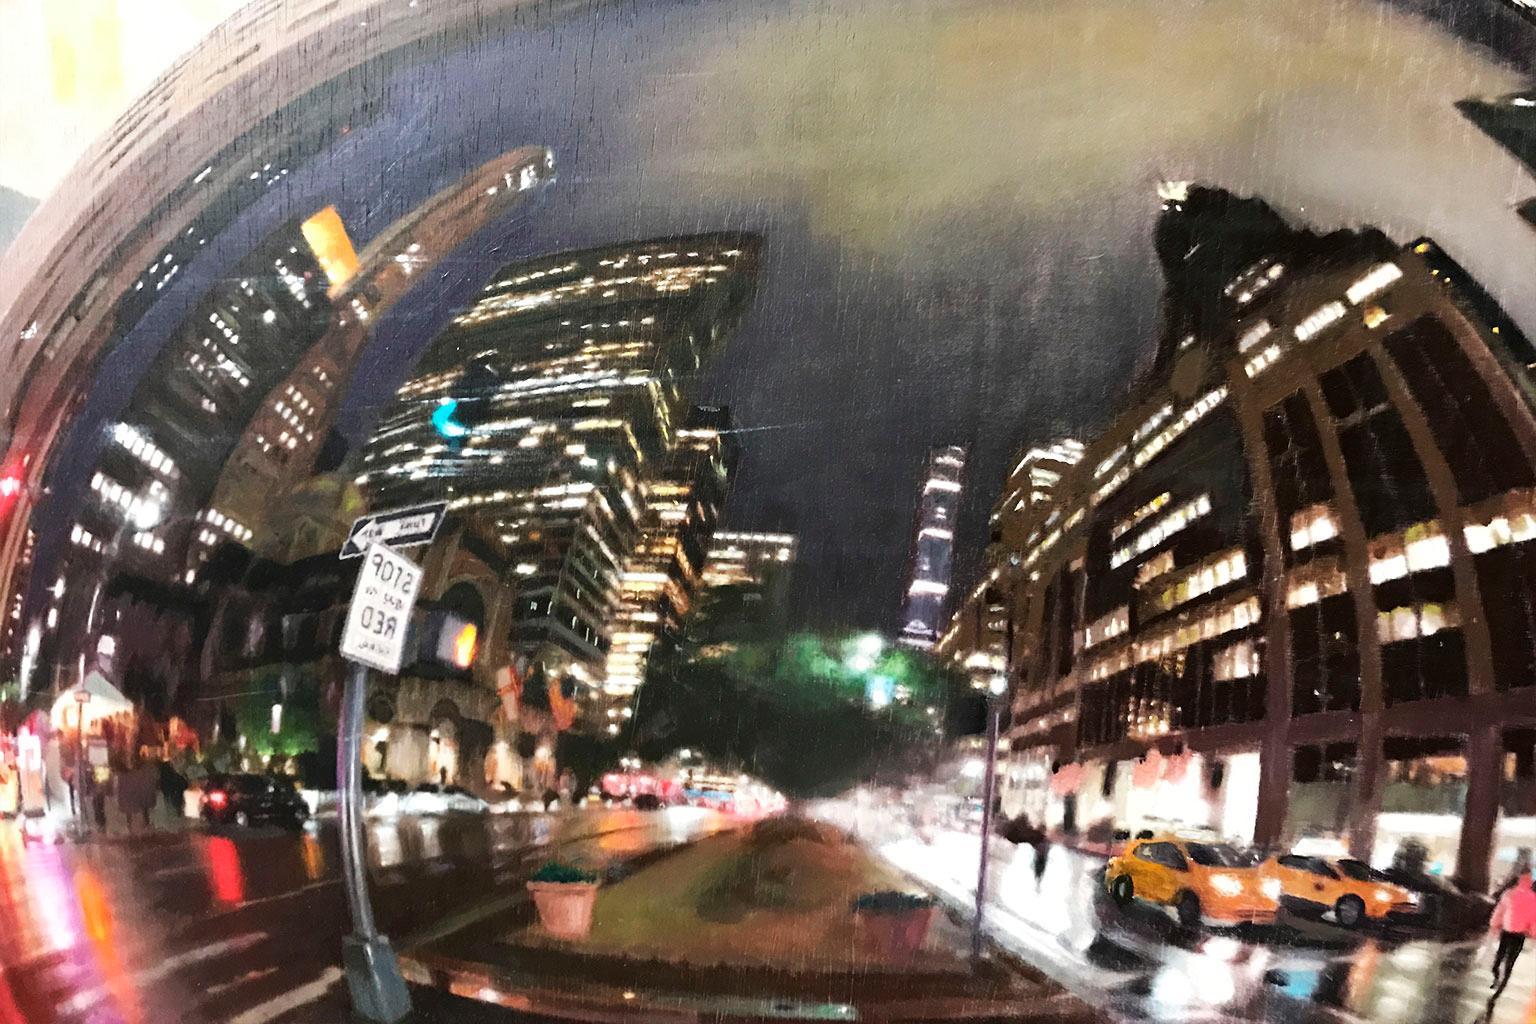 City's soul reflection NY NIGHT 2 - Miguel Guía Impresionism Oil Paint on board For Sale 5